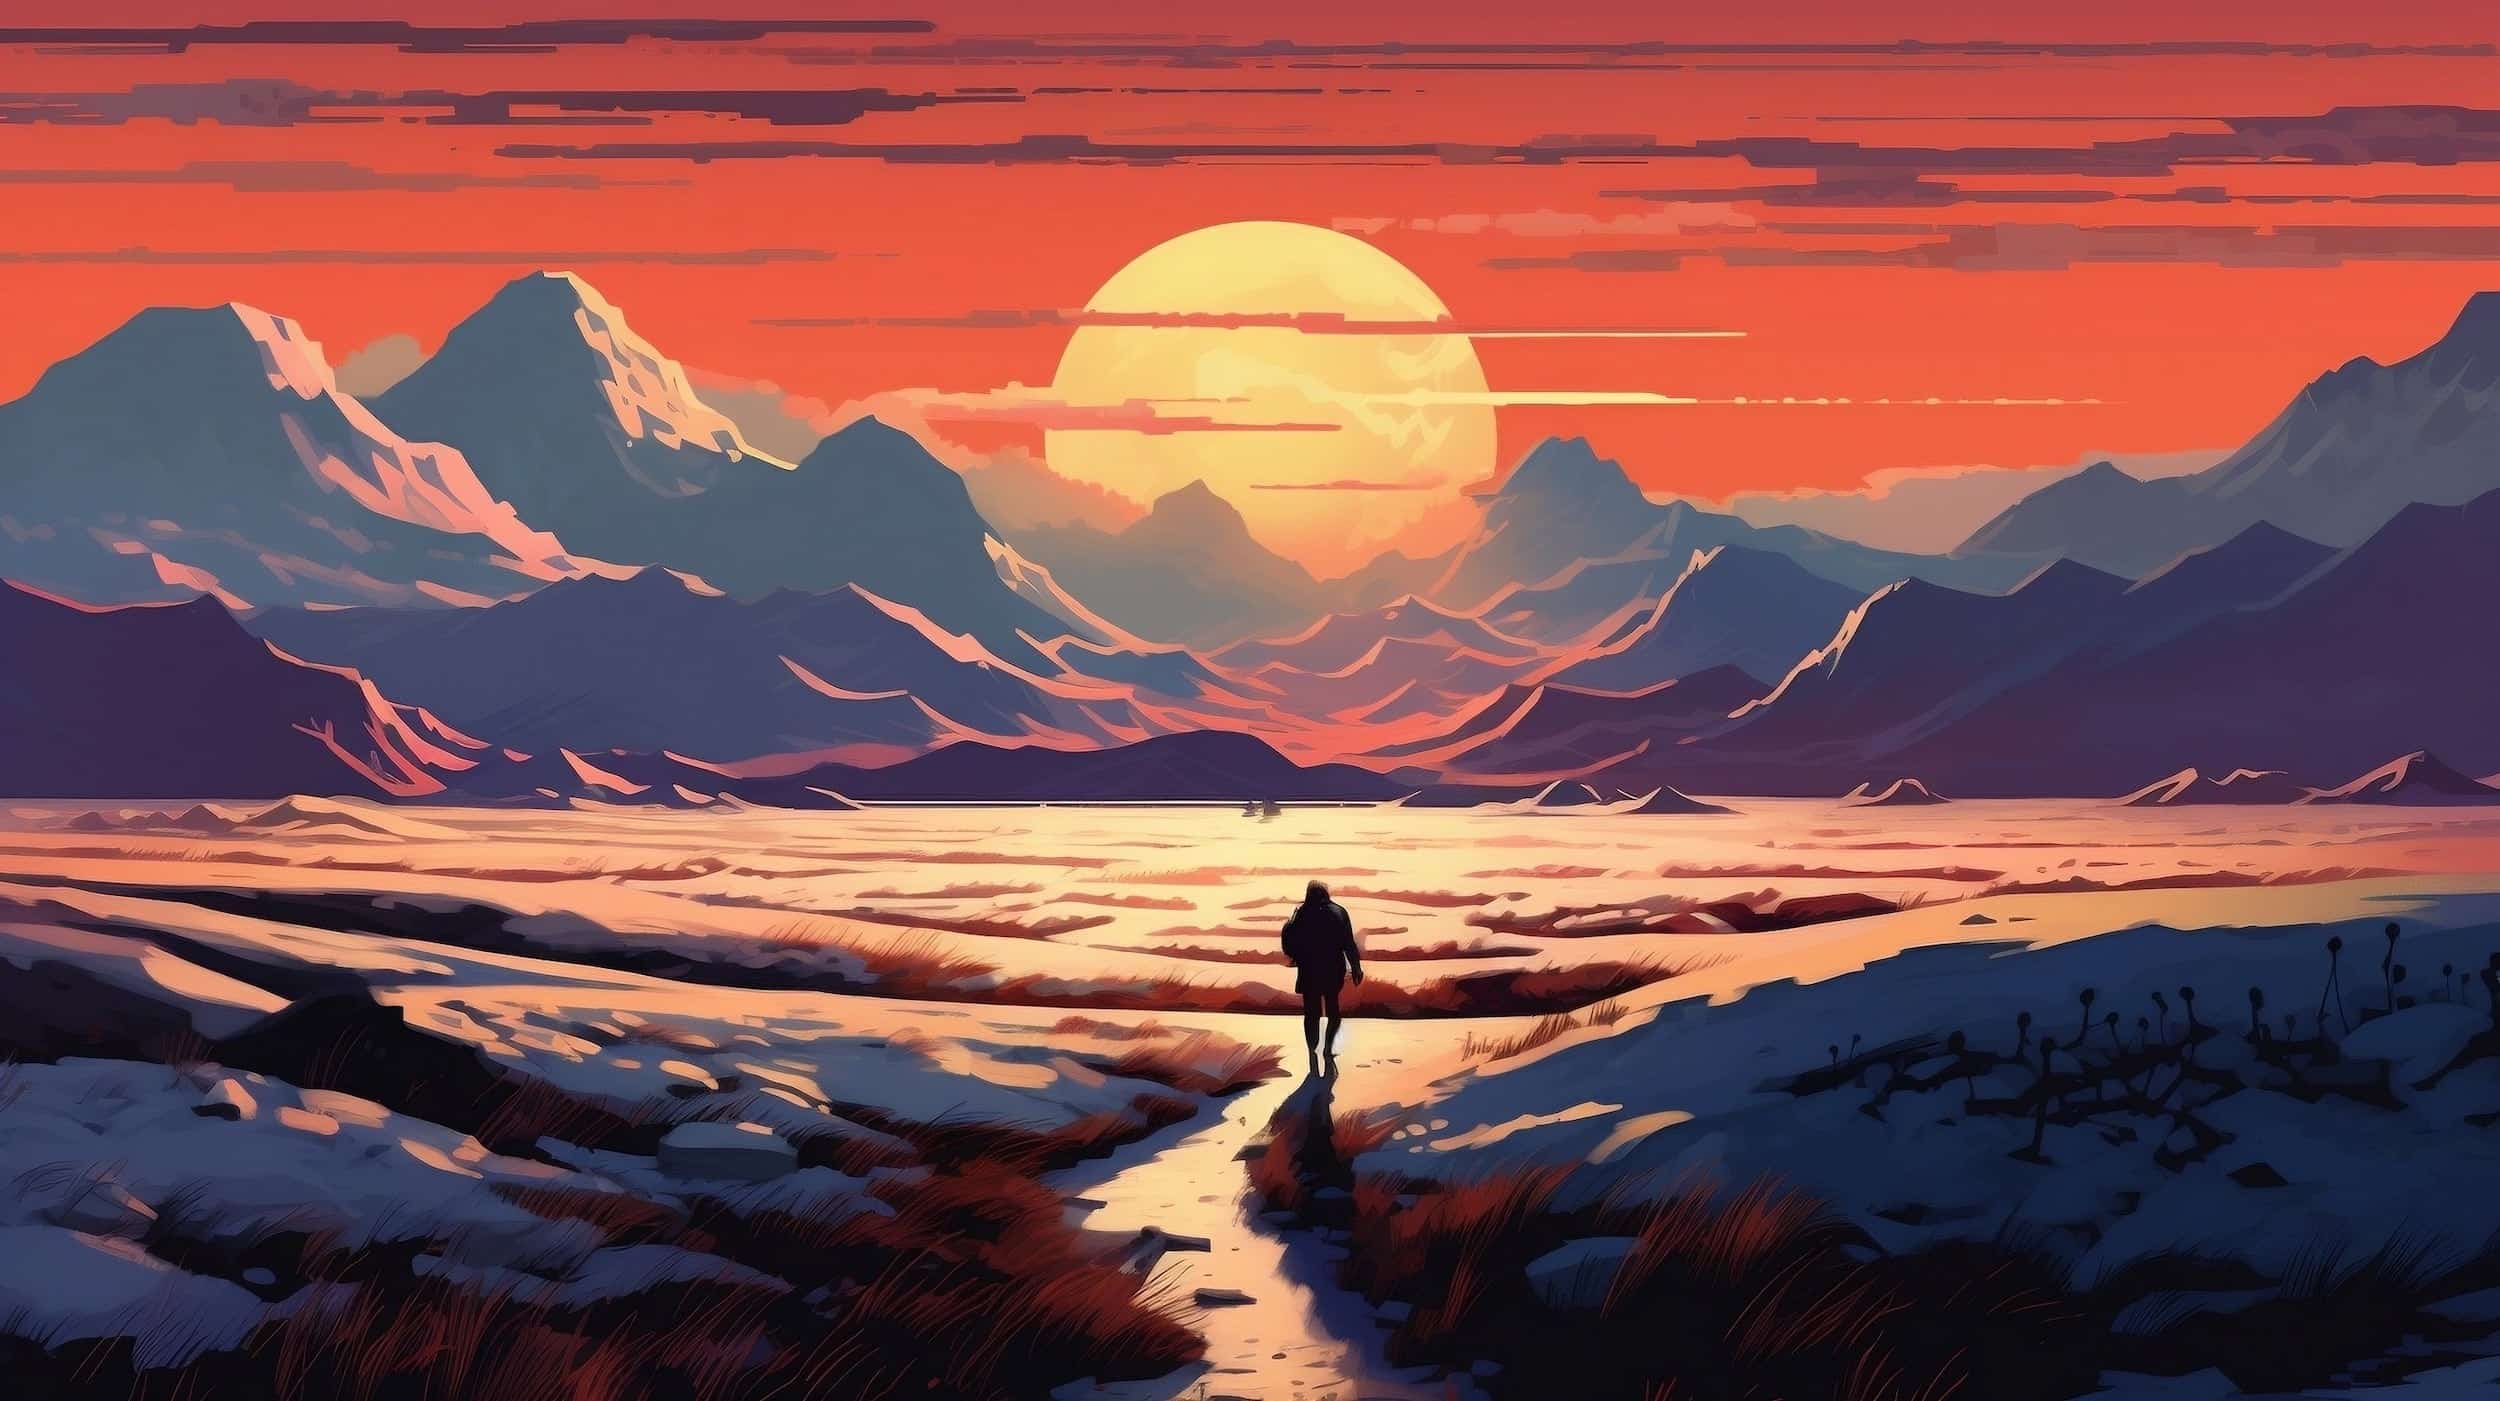 Illustration of person walking through sand dunes into sun setting over snow-capped mountains